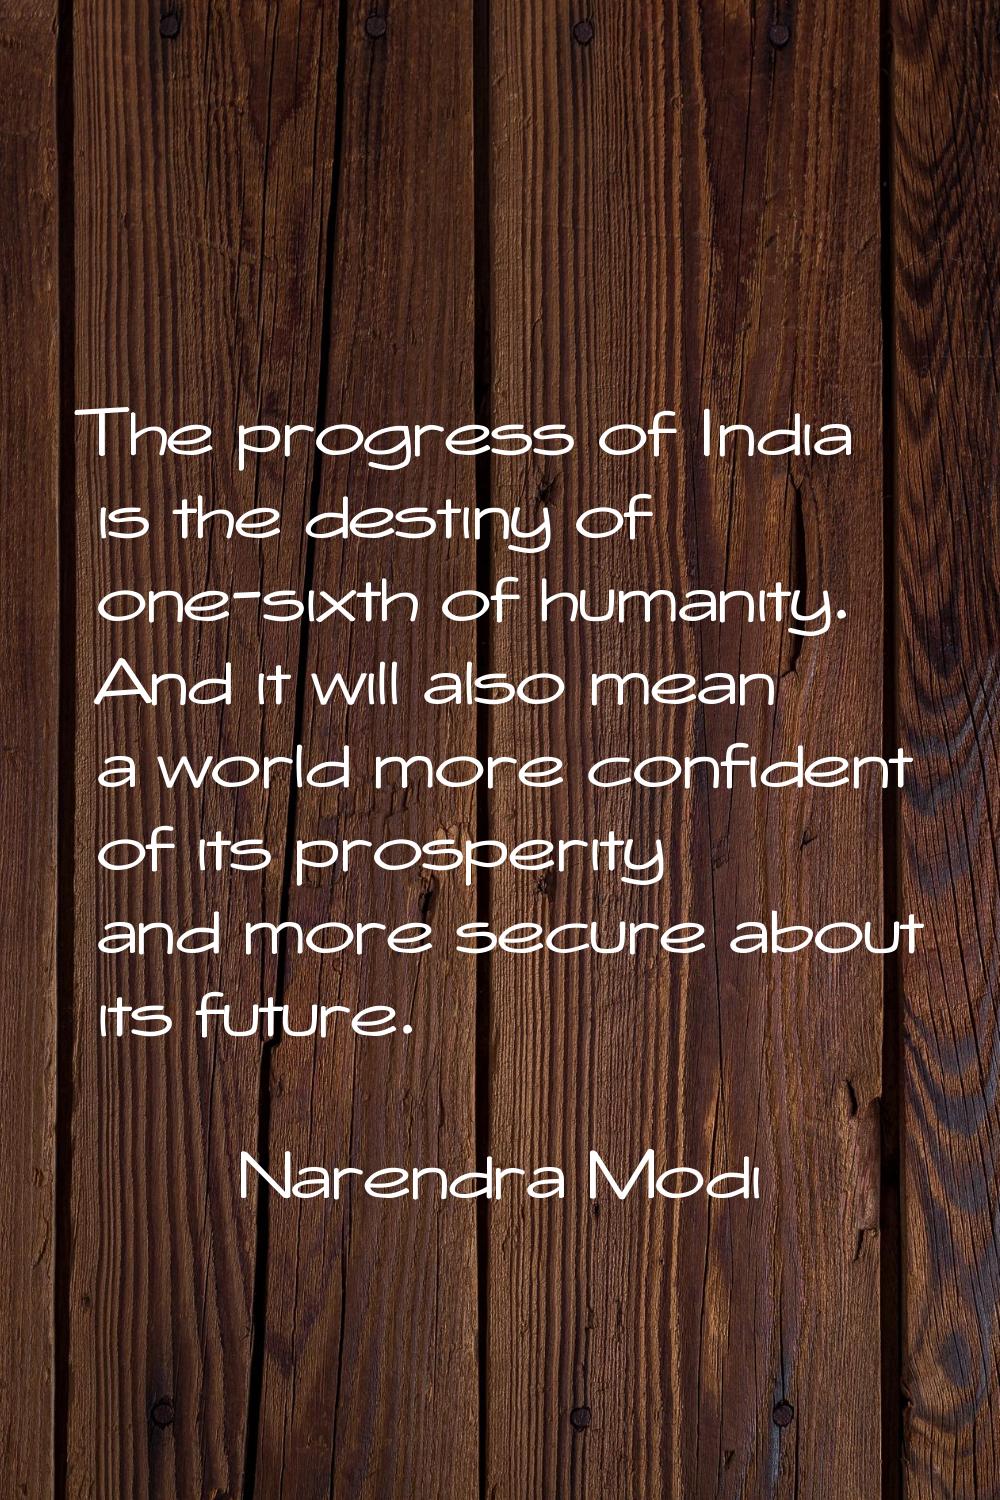 The progress of India is the destiny of one-sixth of humanity. And it will also mean a world more c